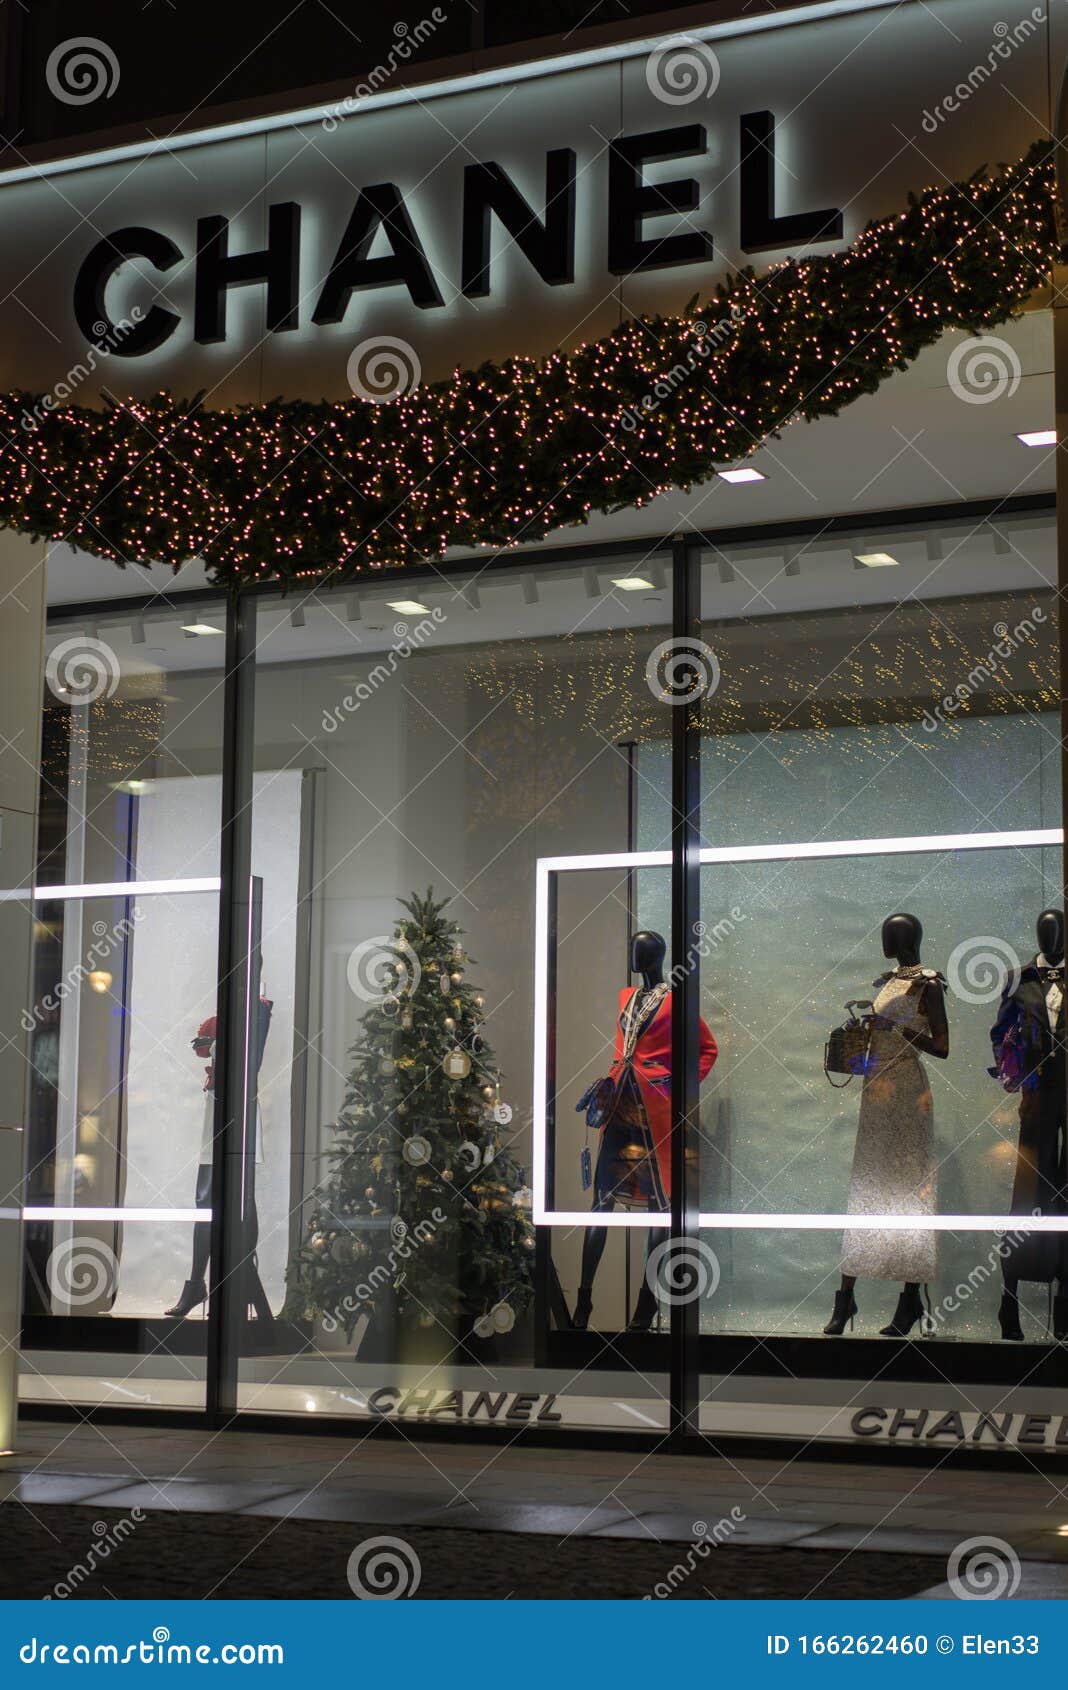 Chanel Storefront with Womens Clothes and Christmas Decorations